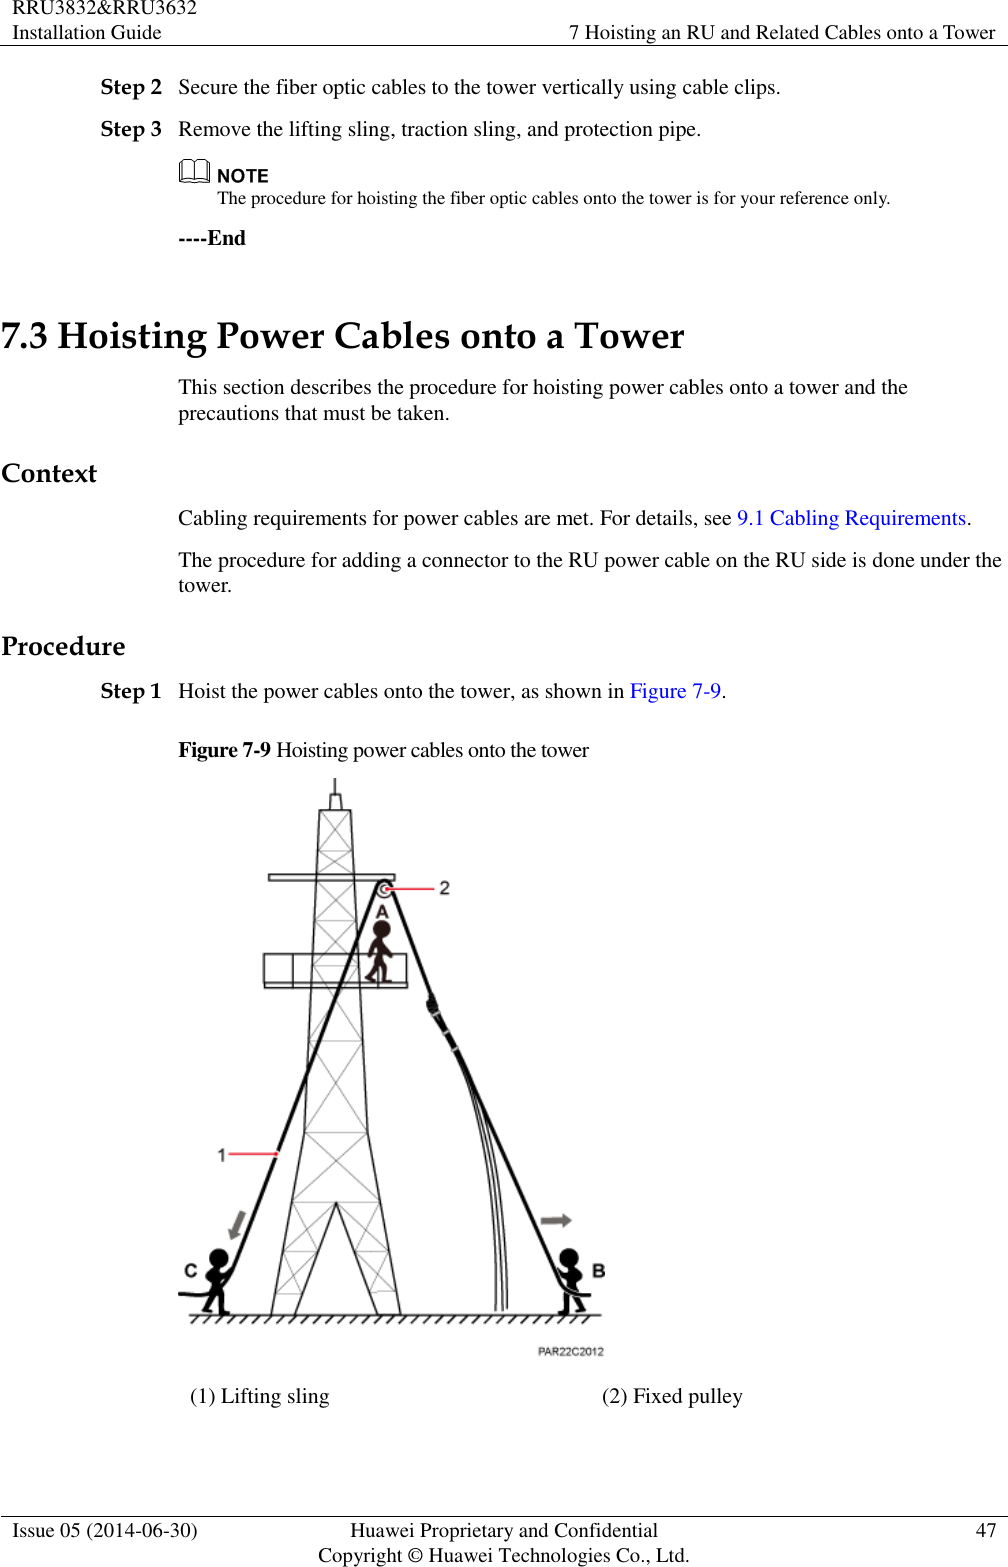 RRU3832&amp;RRU3632 Installation Guide 7 Hoisting an RU and Related Cables onto a Tower  Issue 05 (2014-06-30) Huawei Proprietary and Confidential                                     Copyright © Huawei Technologies Co., Ltd. 47  Step 2 Secure the fiber optic cables to the tower vertically using cable clips. Step 3 Remove the lifting sling, traction sling, and protection pipe.  The procedure for hoisting the fiber optic cables onto the tower is for your reference only. ----End 7.3 Hoisting Power Cables onto a Tower This section describes the procedure for hoisting power cables onto a tower and the precautions that must be taken. Context Cabling requirements for power cables are met. For details, see 9.1 Cabling Requirements. The procedure for adding a connector to the RU power cable on the RU side is done under the tower. Procedure Step 1 Hoist the power cables onto the tower, as shown in Figure 7-9. Figure 7-9 Hoisting power cables onto the tower  (1) Lifting sling (2) Fixed pulley  